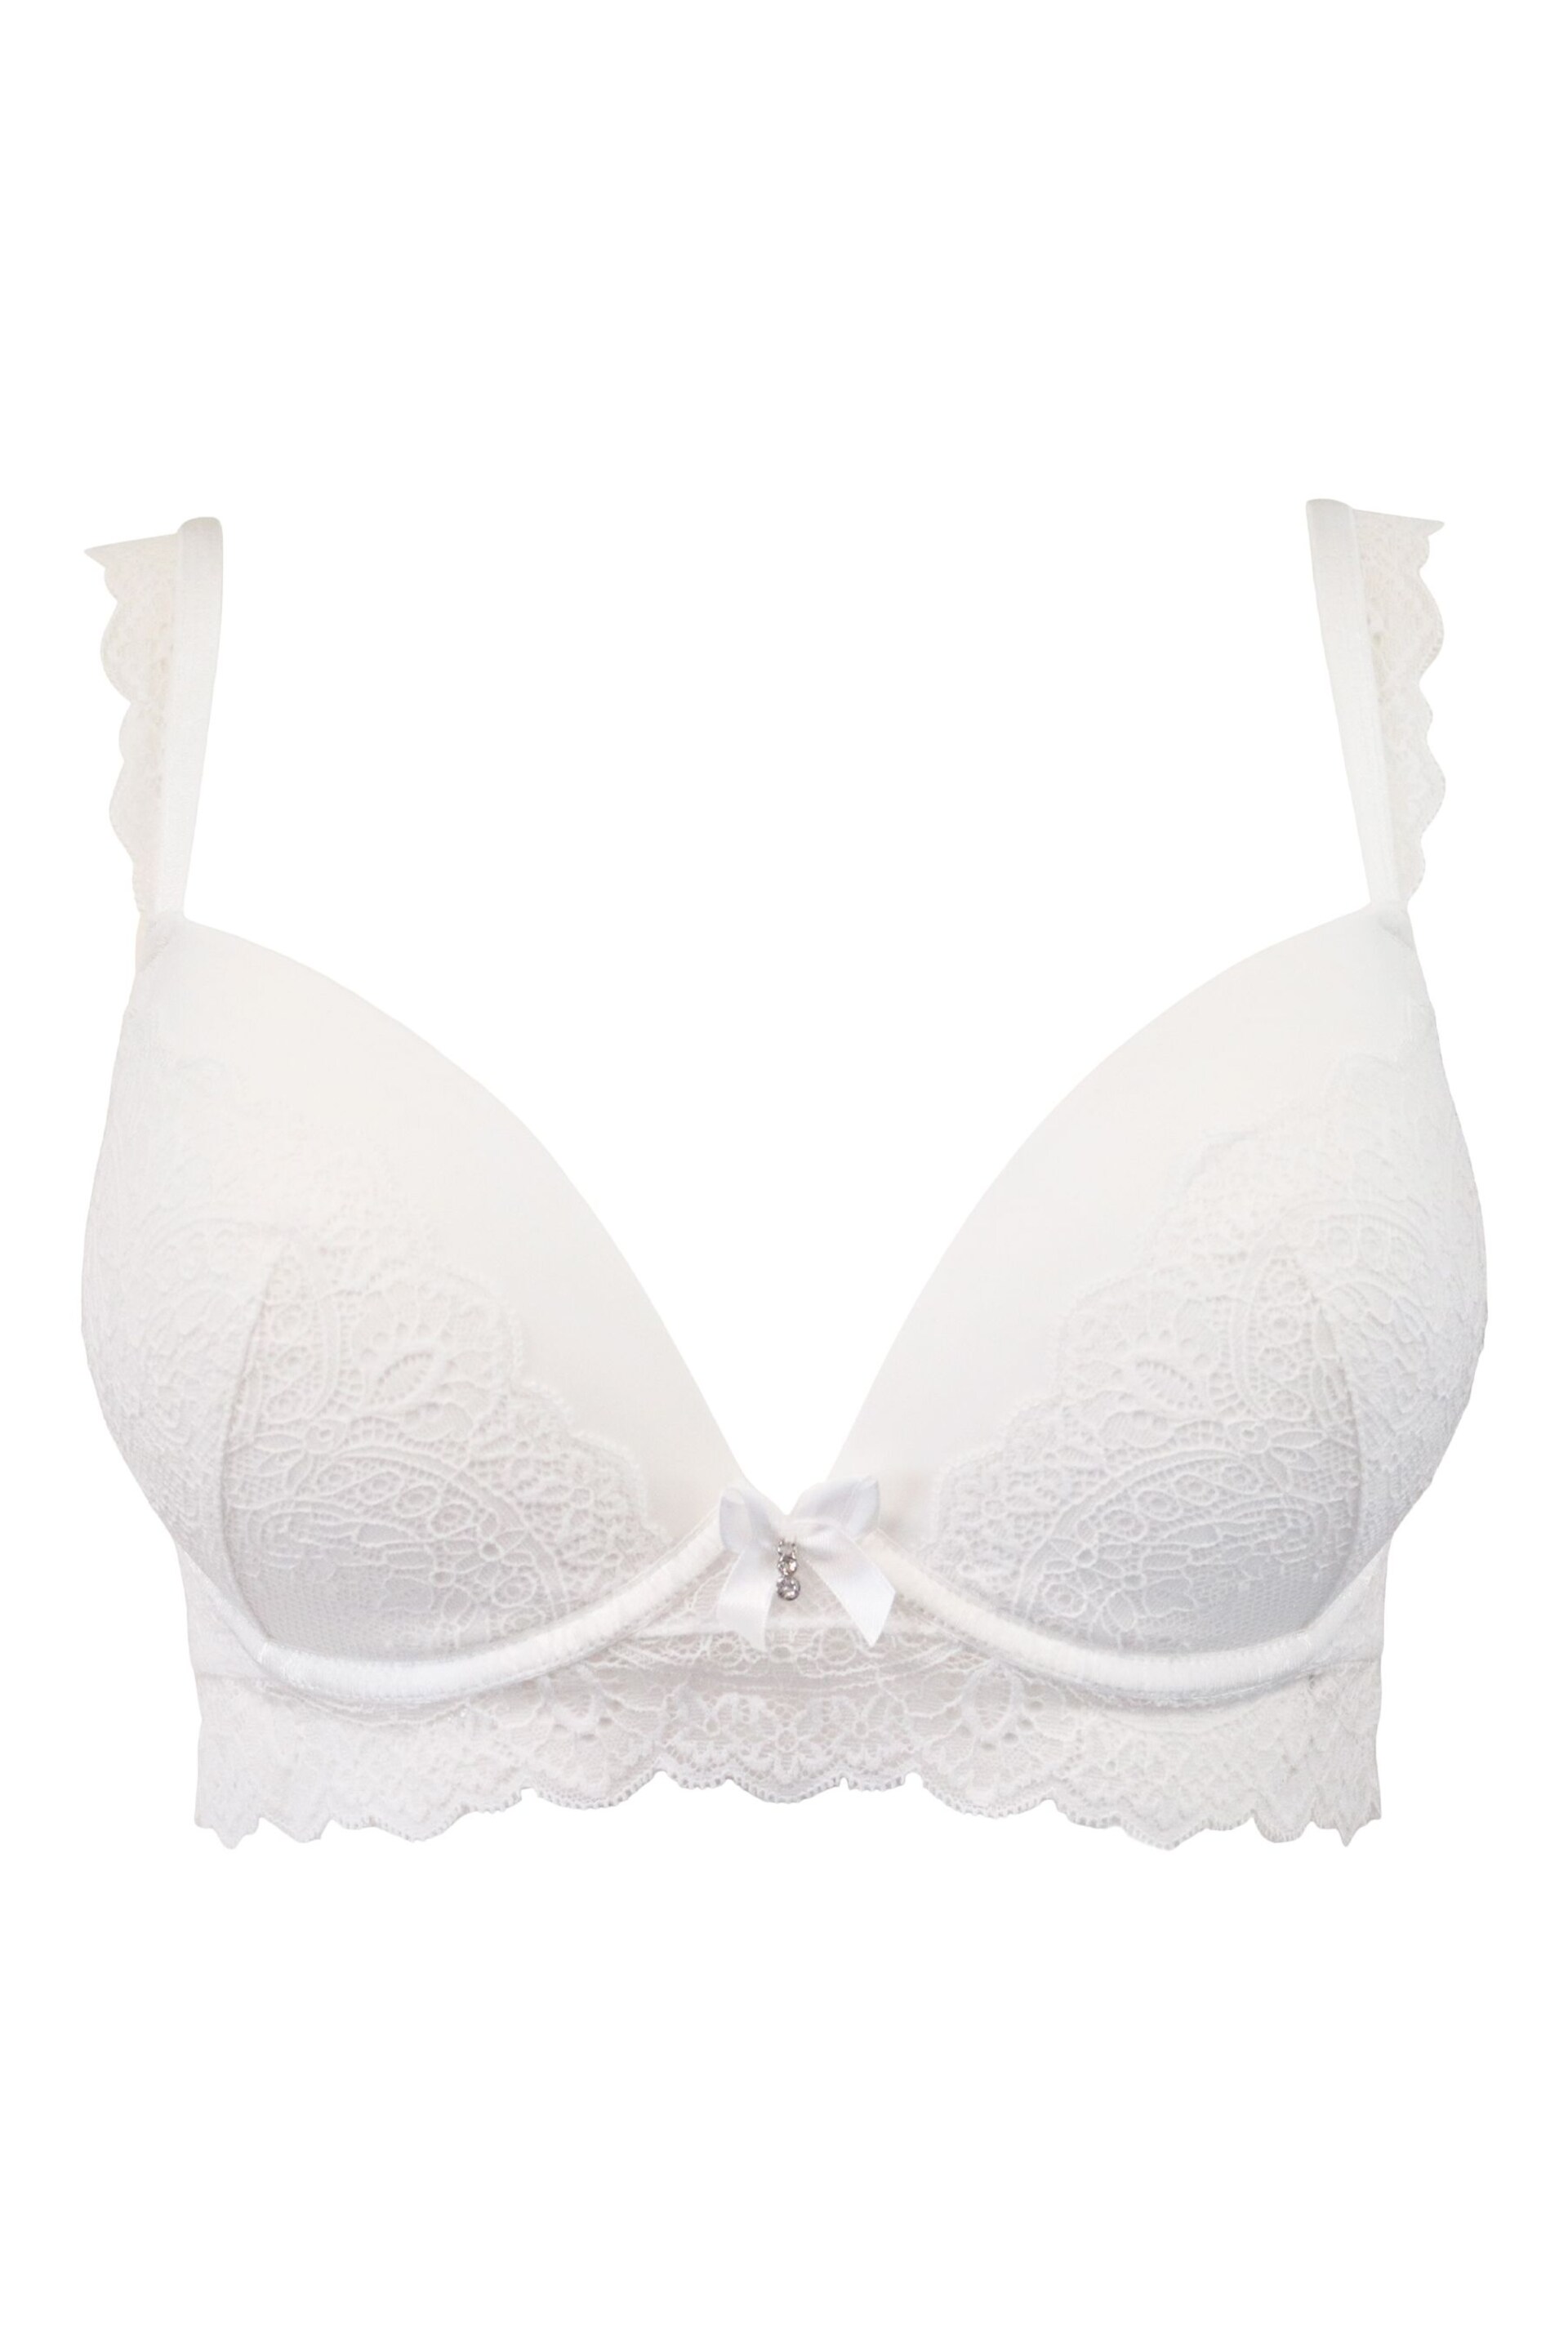 Pour Moi White Padded Divine Multiway Strapless Bra - Image 4 of 5